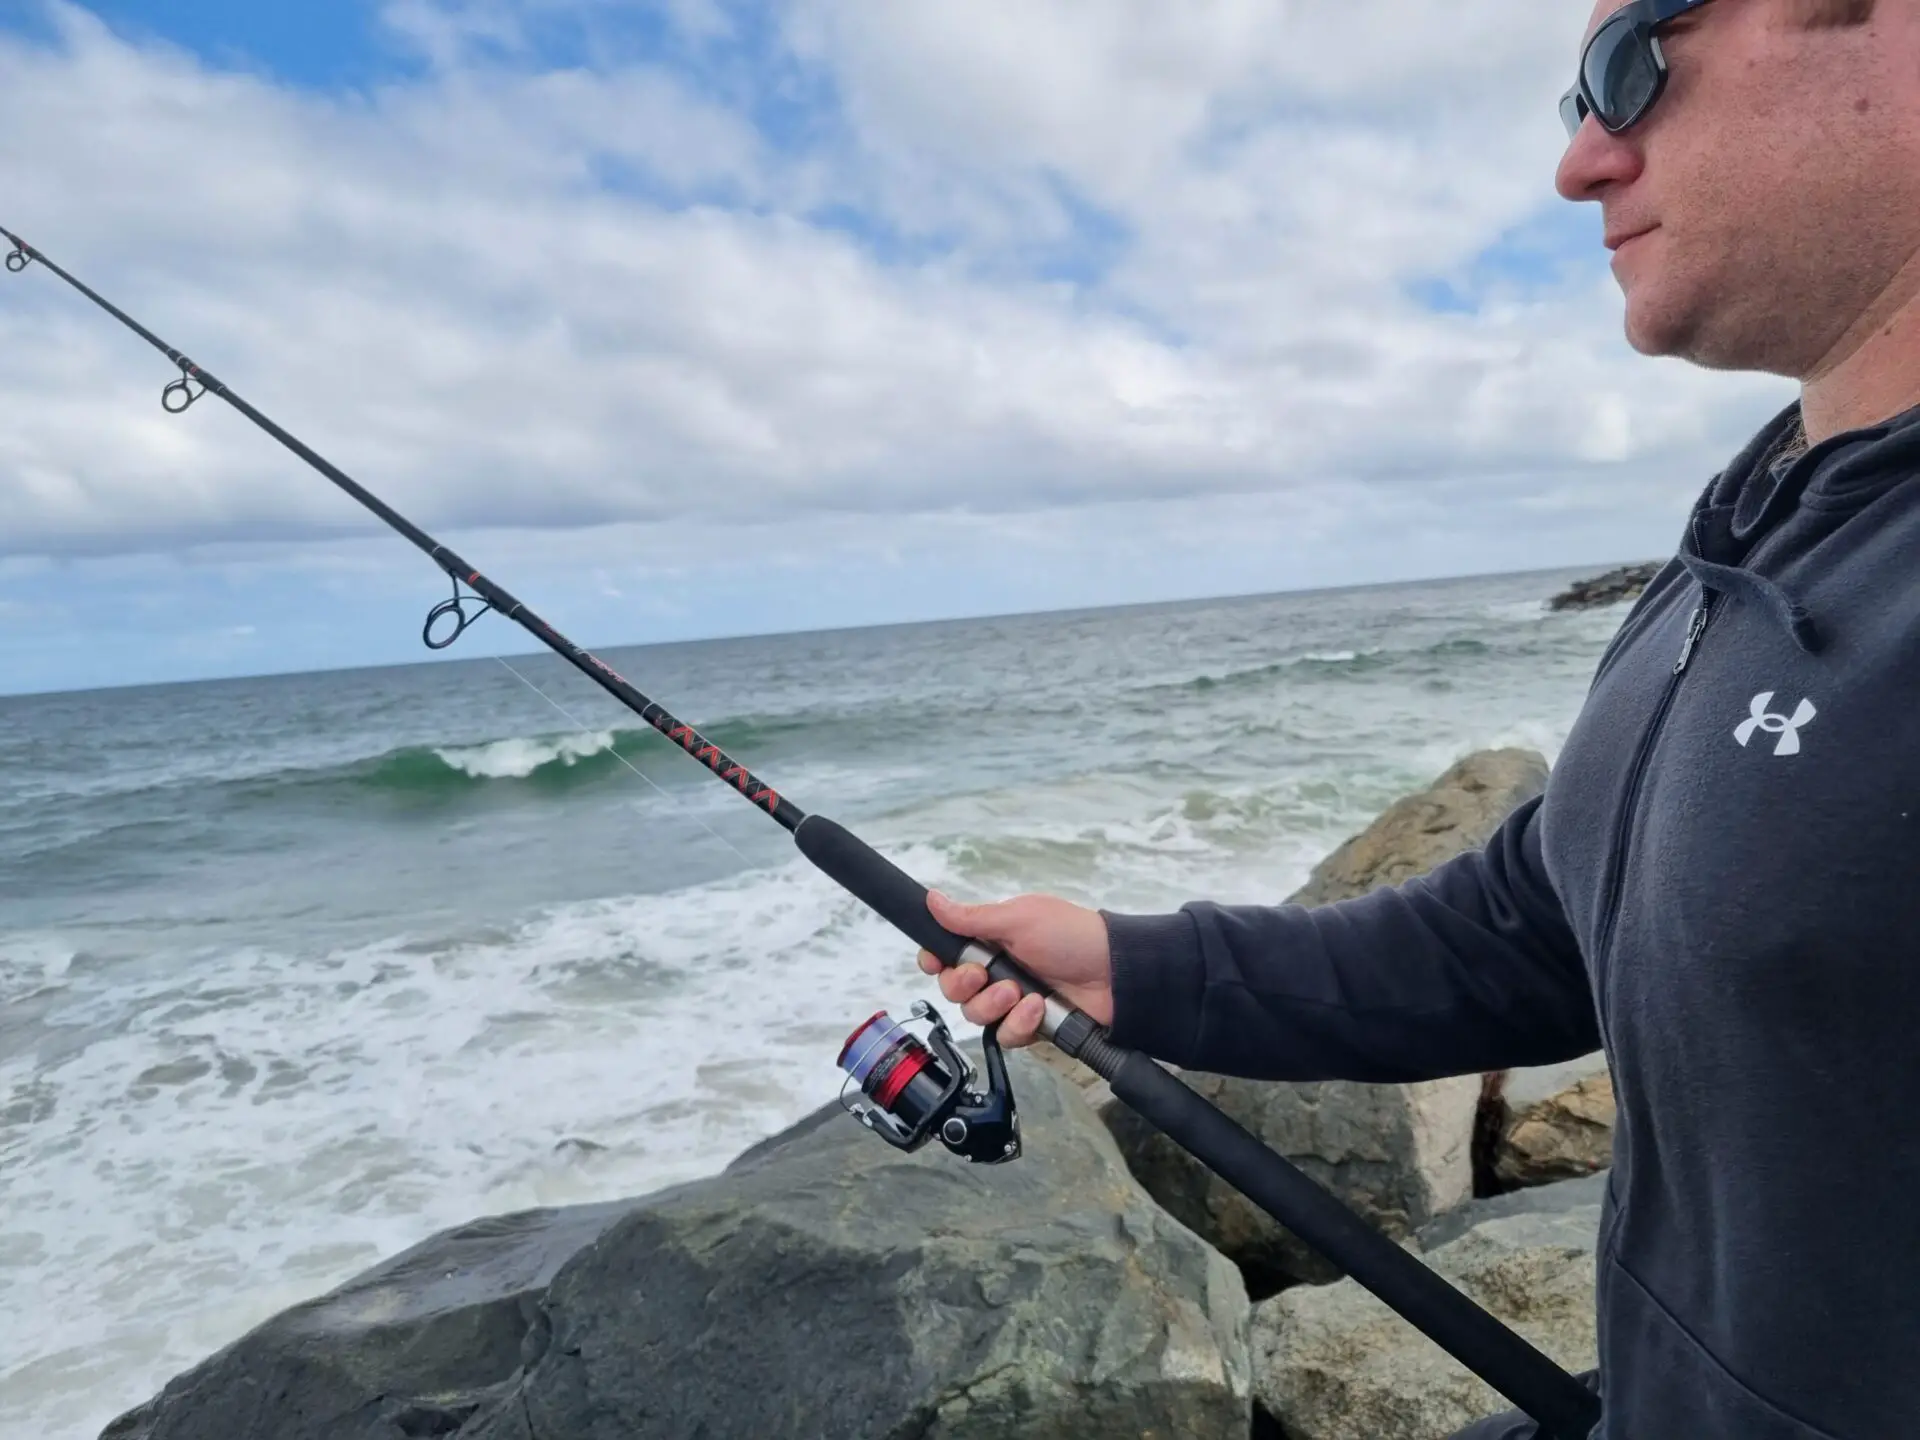 Shimano Sienna being used by Russ Egan fishing in the ocean from the shore